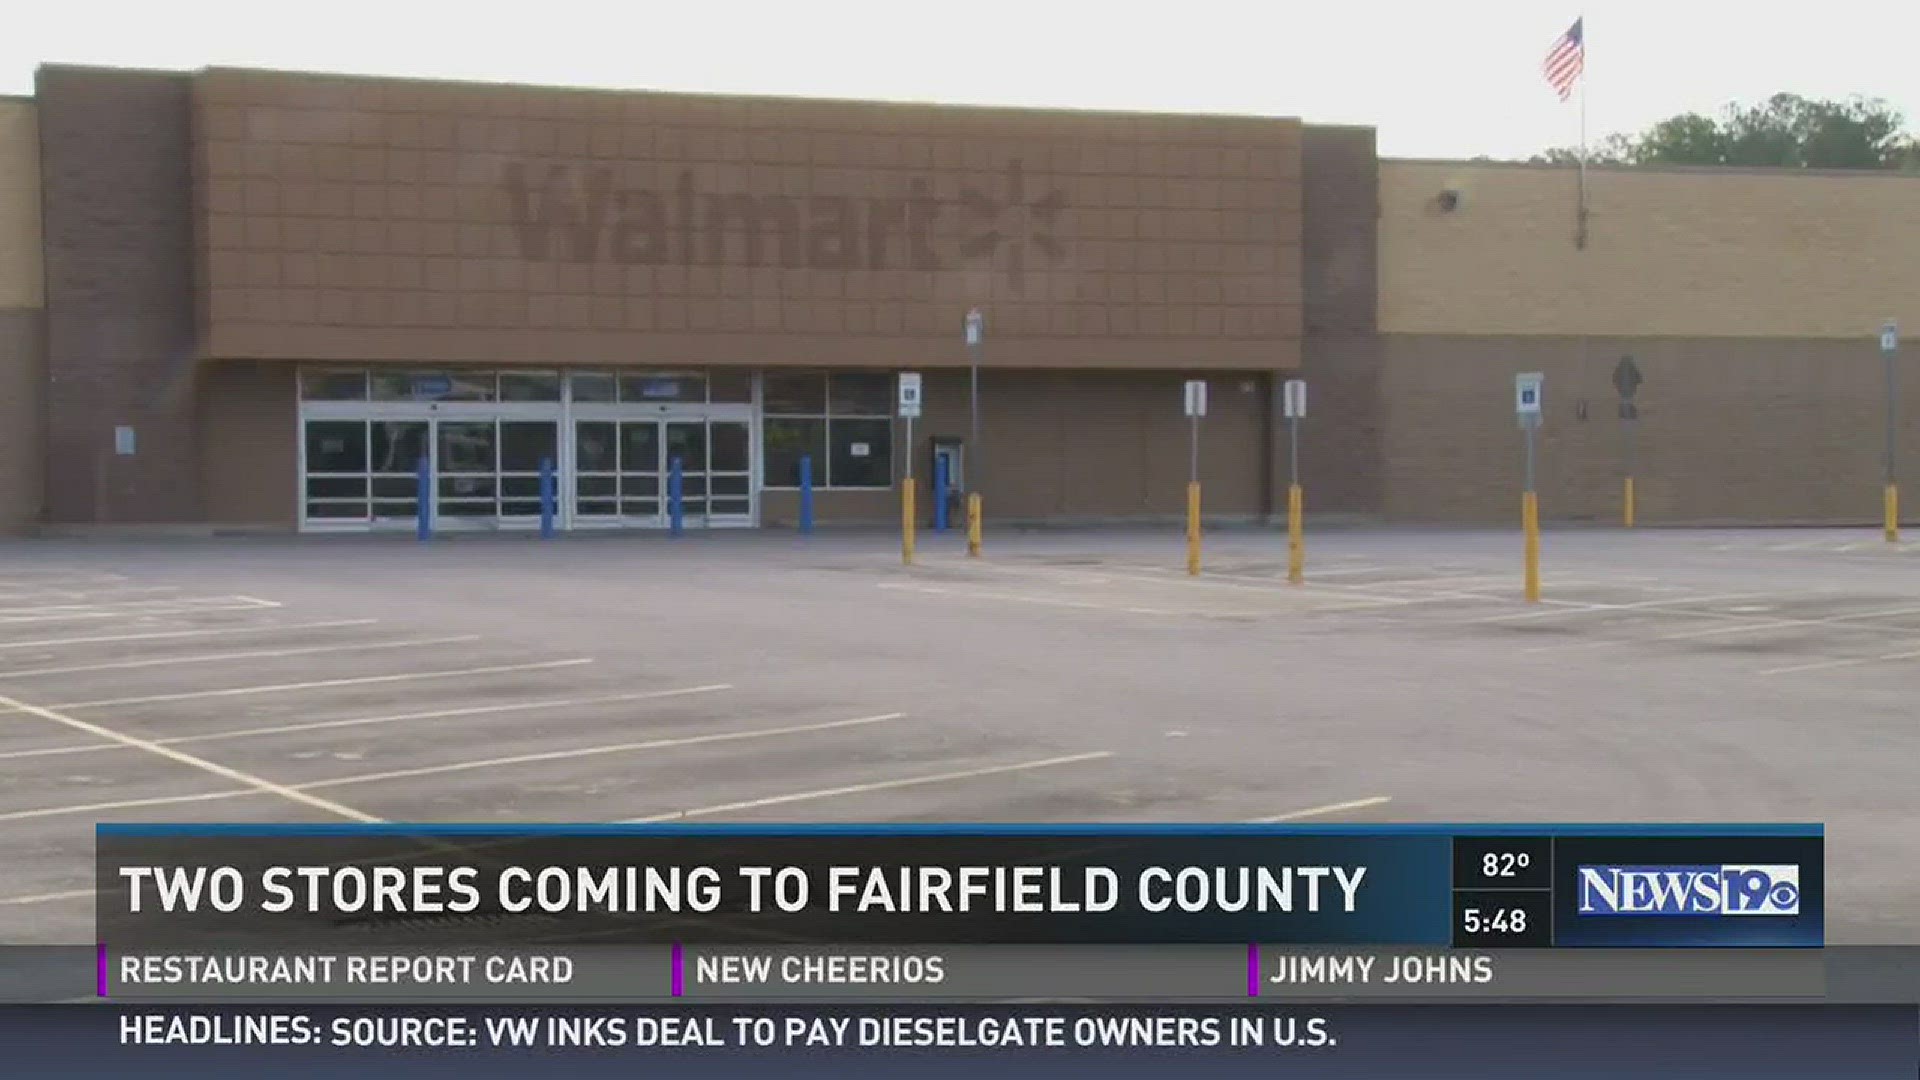 Fairfield County residents are hoping two new stores will help replace services lost when Walmart shut down.